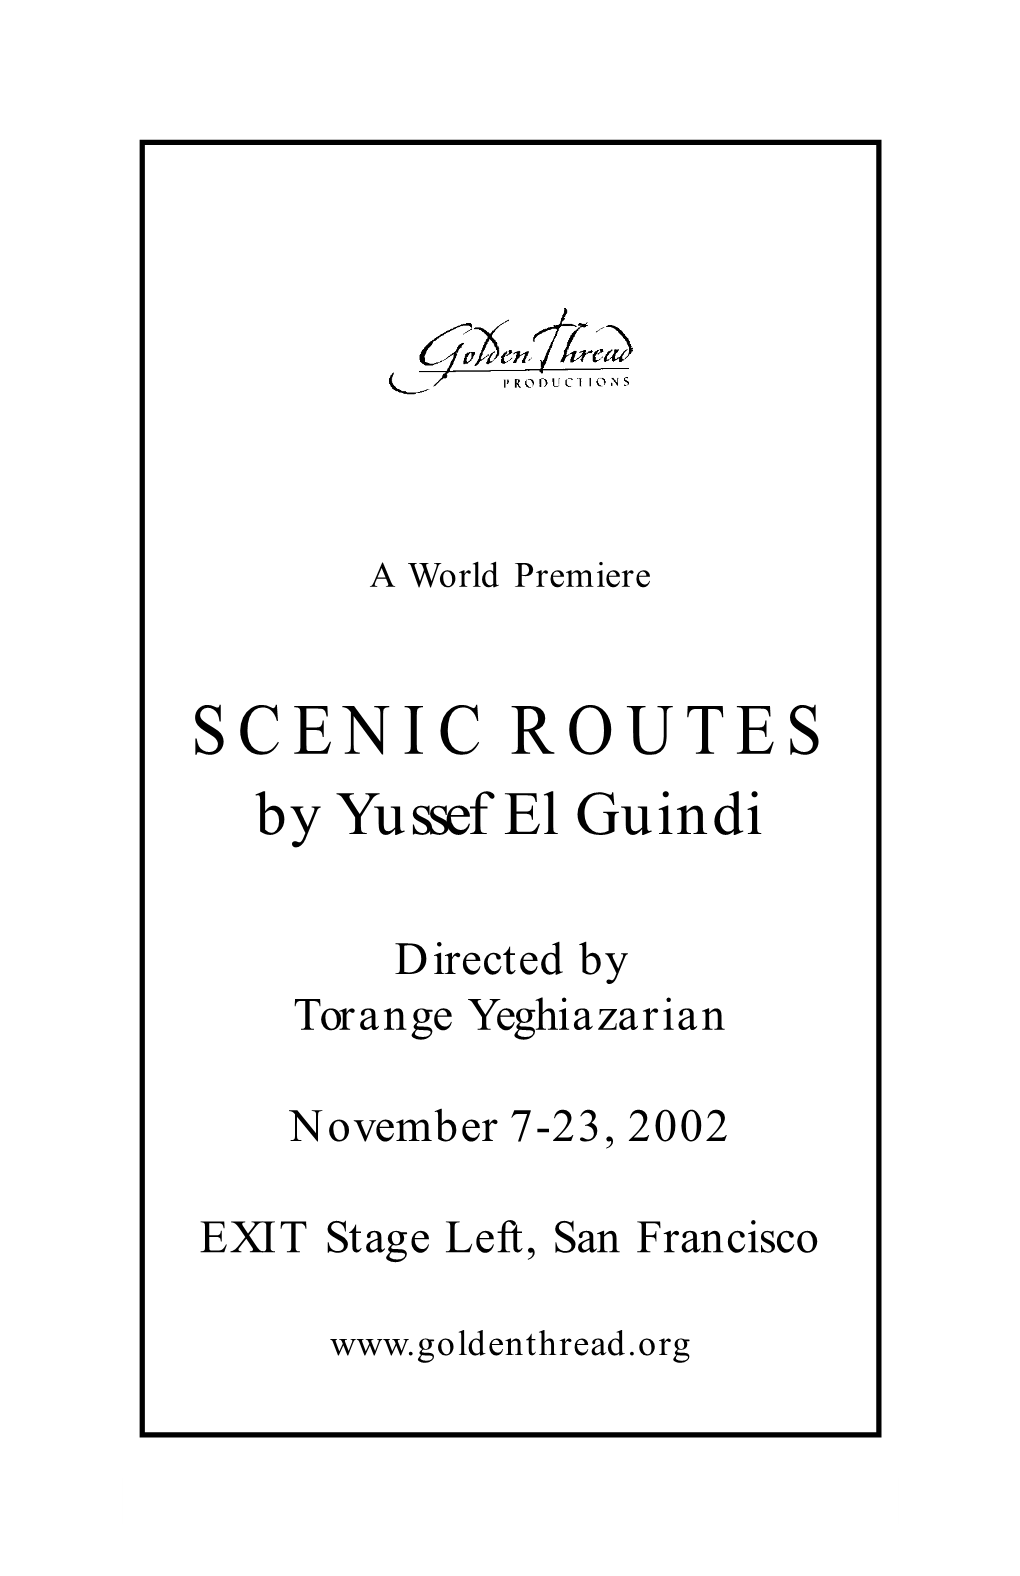 SCENIC ROUTES by Yussef El Guindi